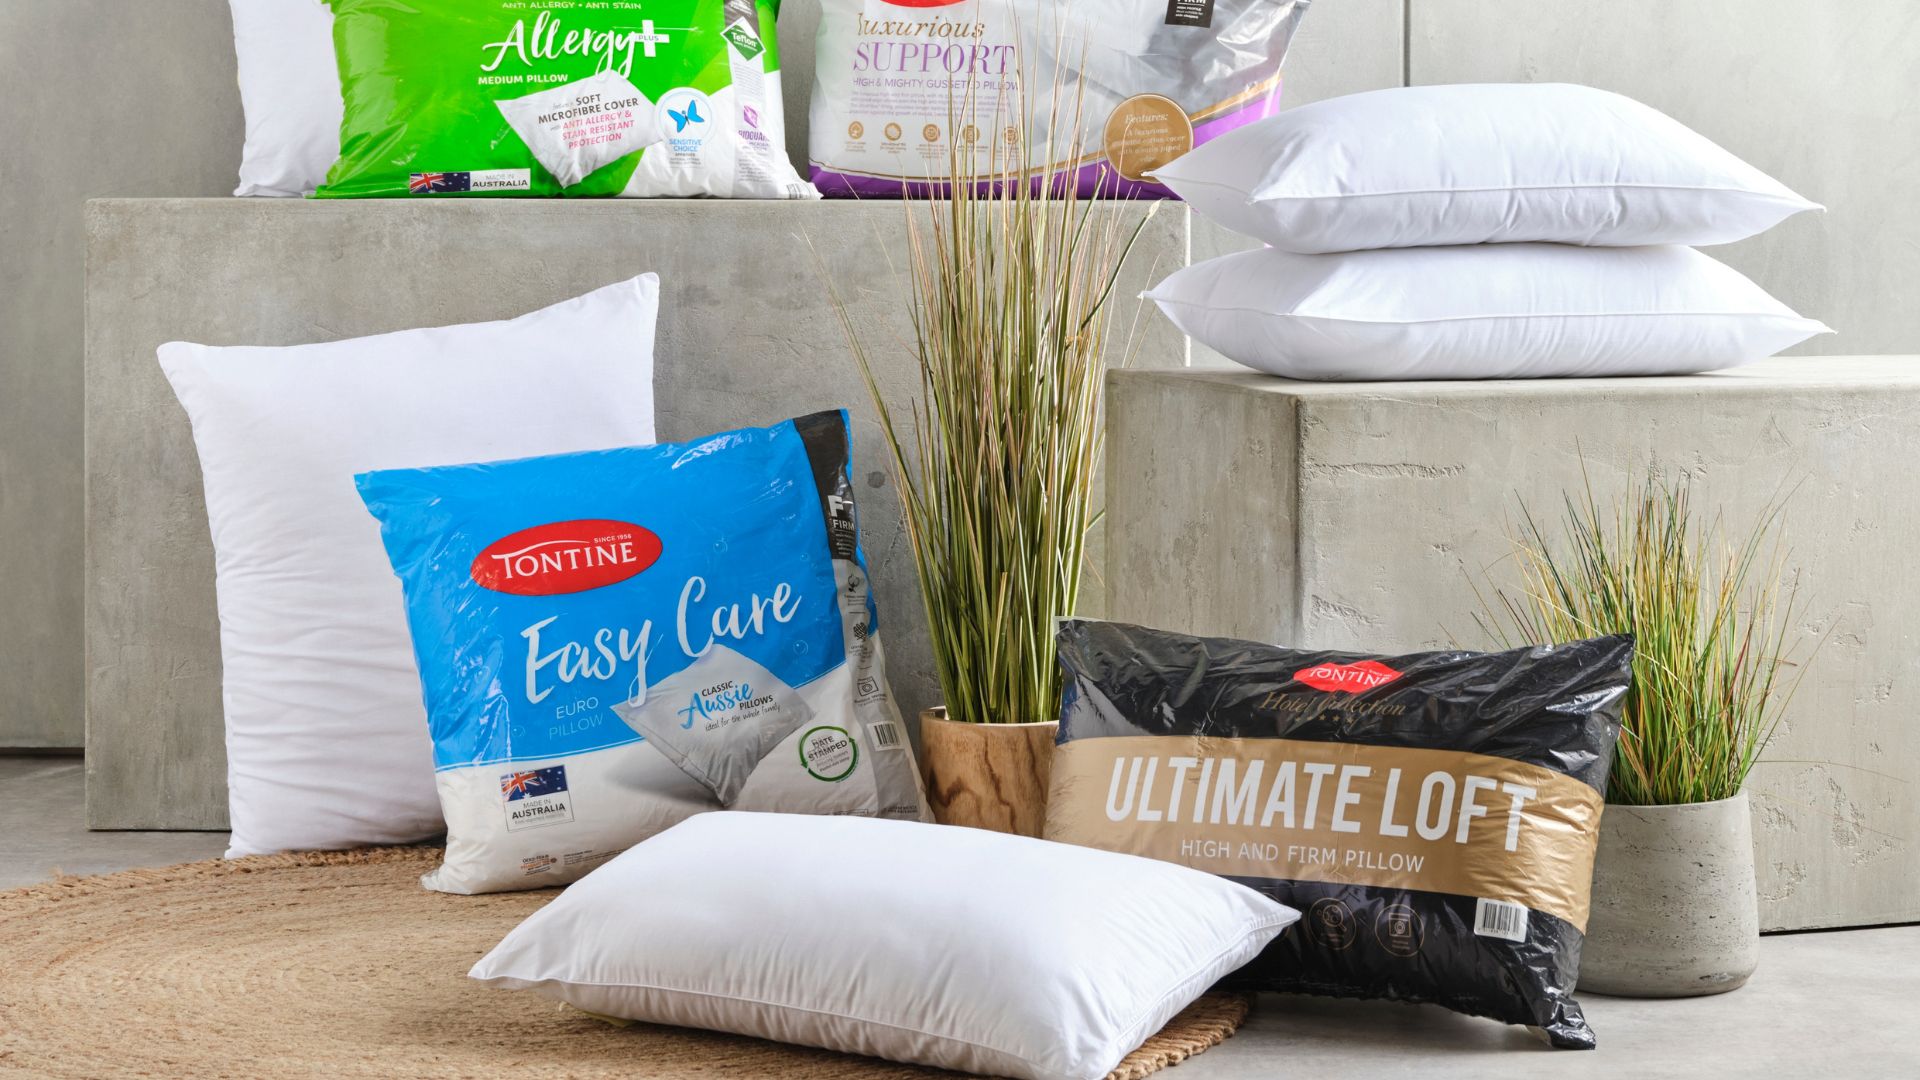 Tontine Ultimate Loft, Easy Care, Luxurious Support, Anti-Allergy & Junior Pillows